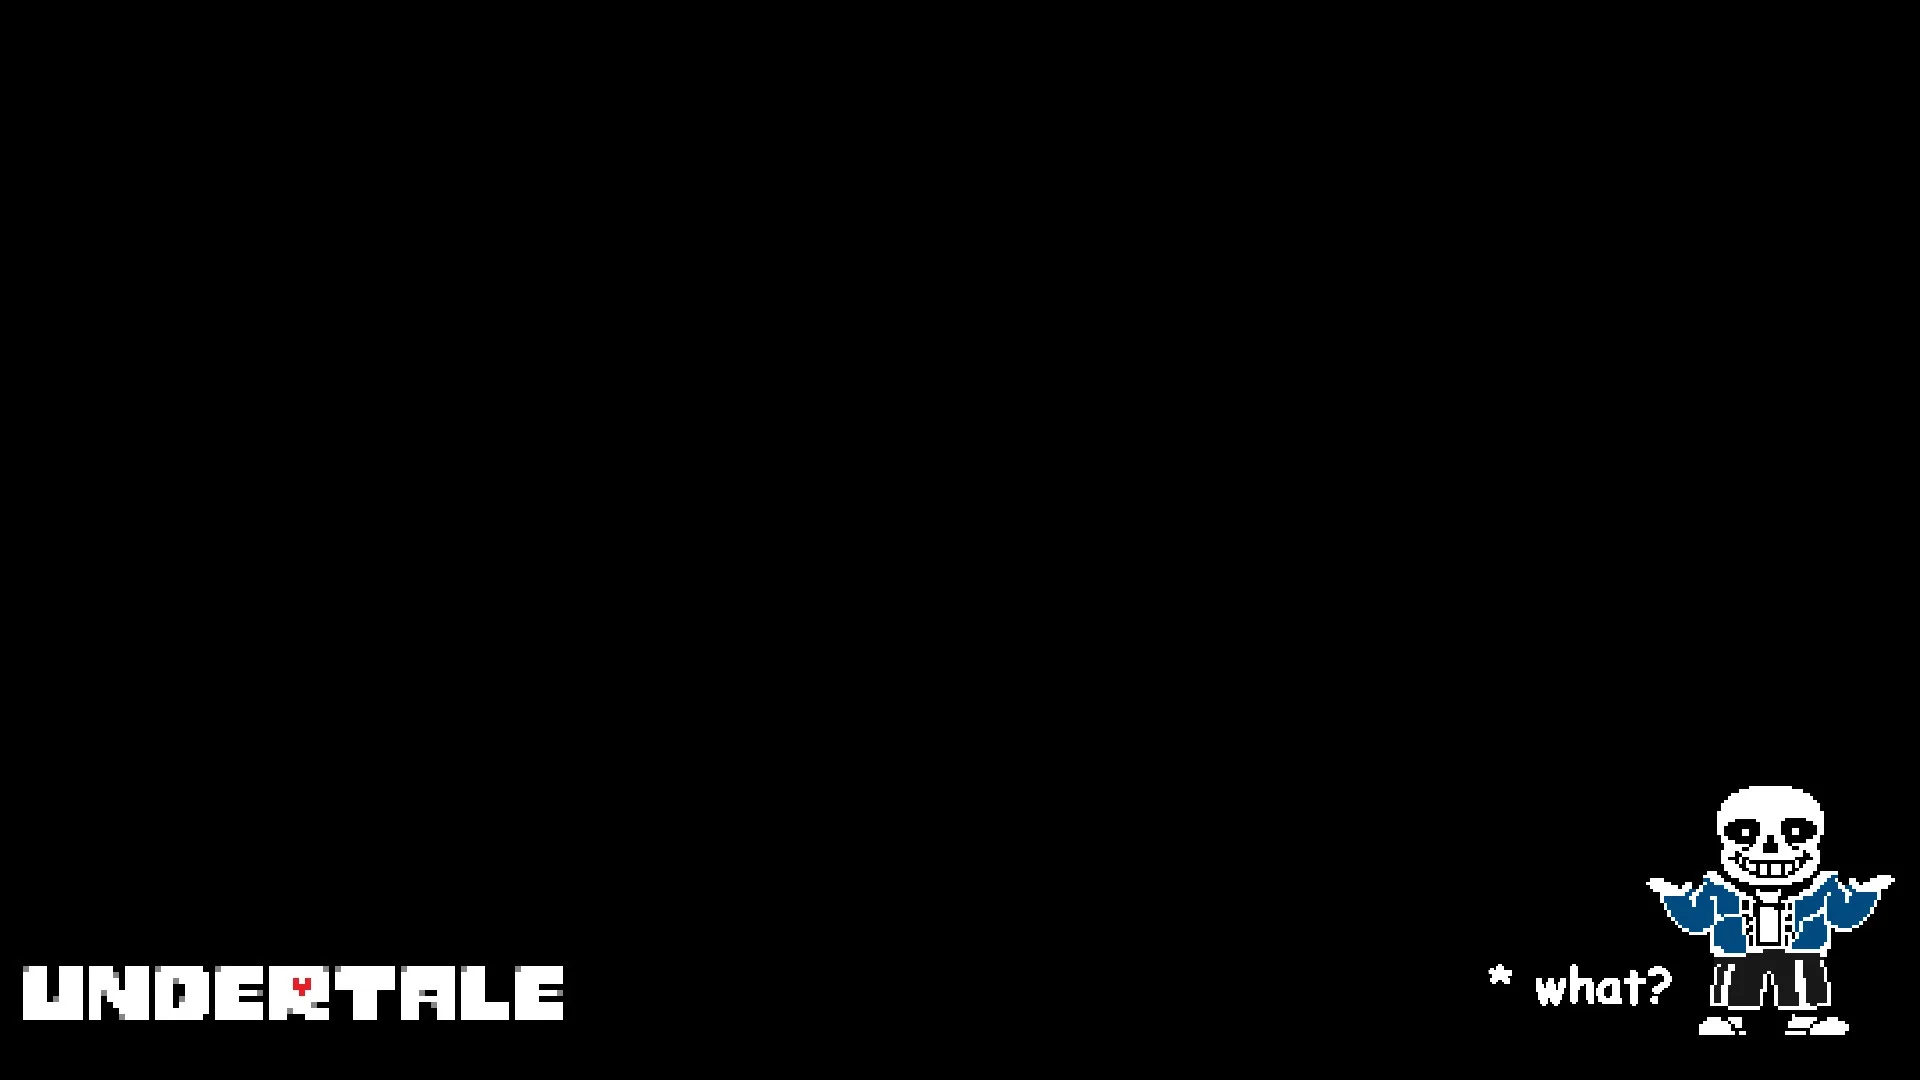 Made a quick wallpaper for Undertale. Check it out.